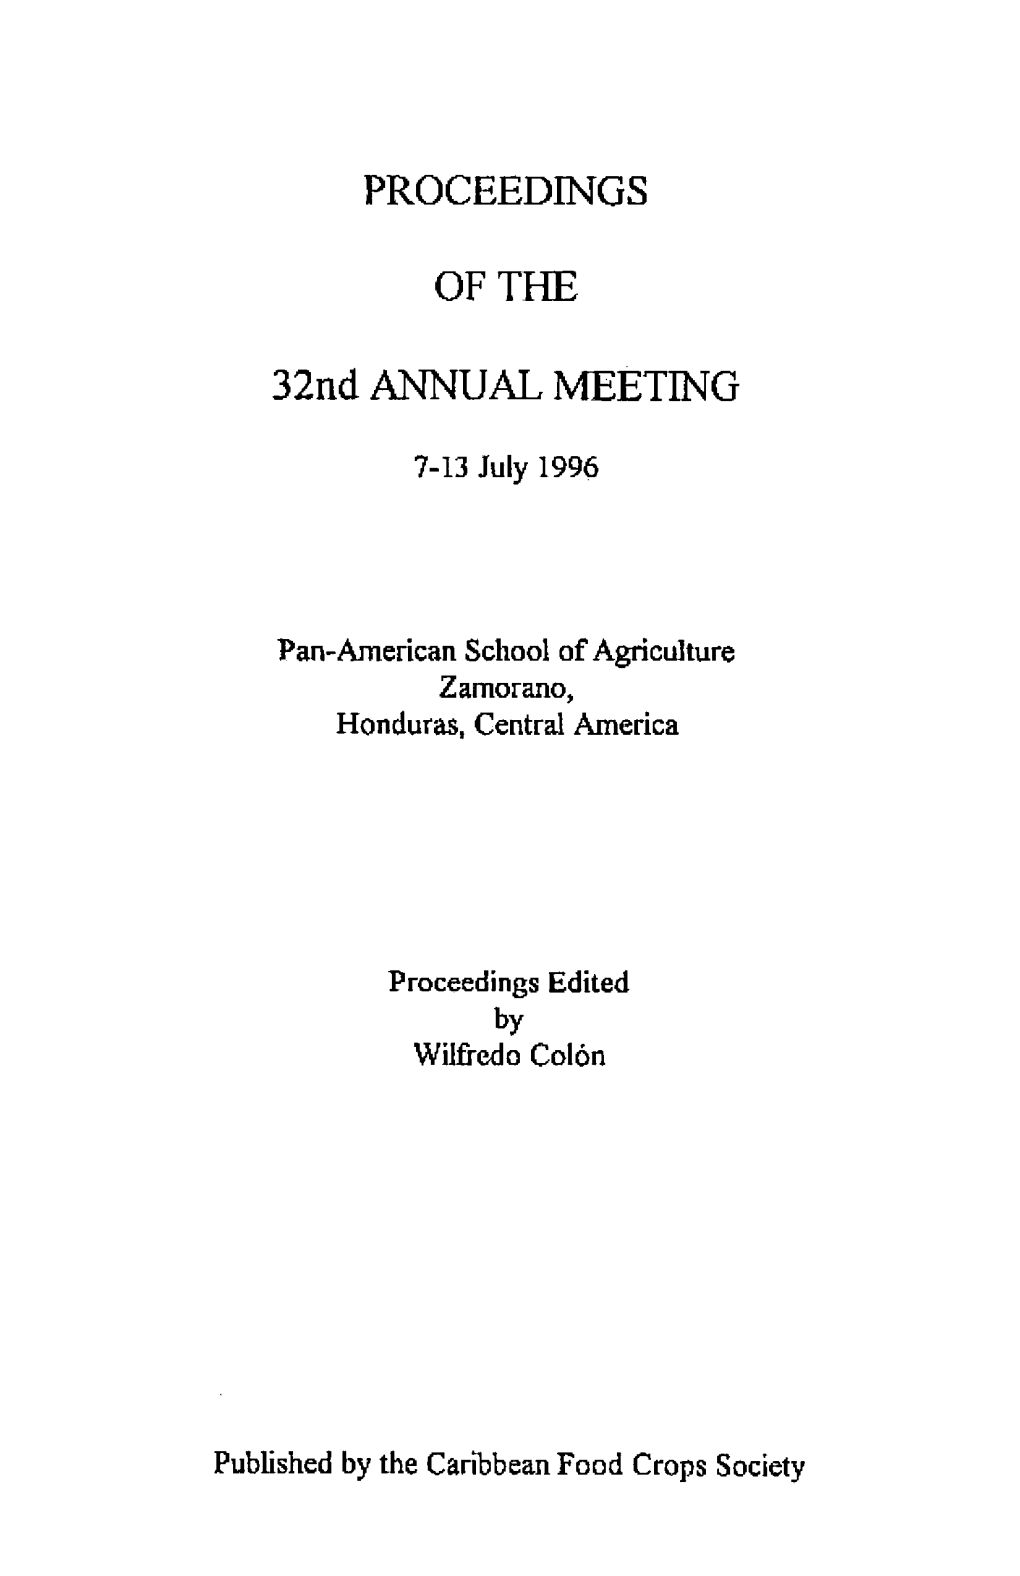 PROCEEDINGS of the 32Nd ANNUAL MEETING